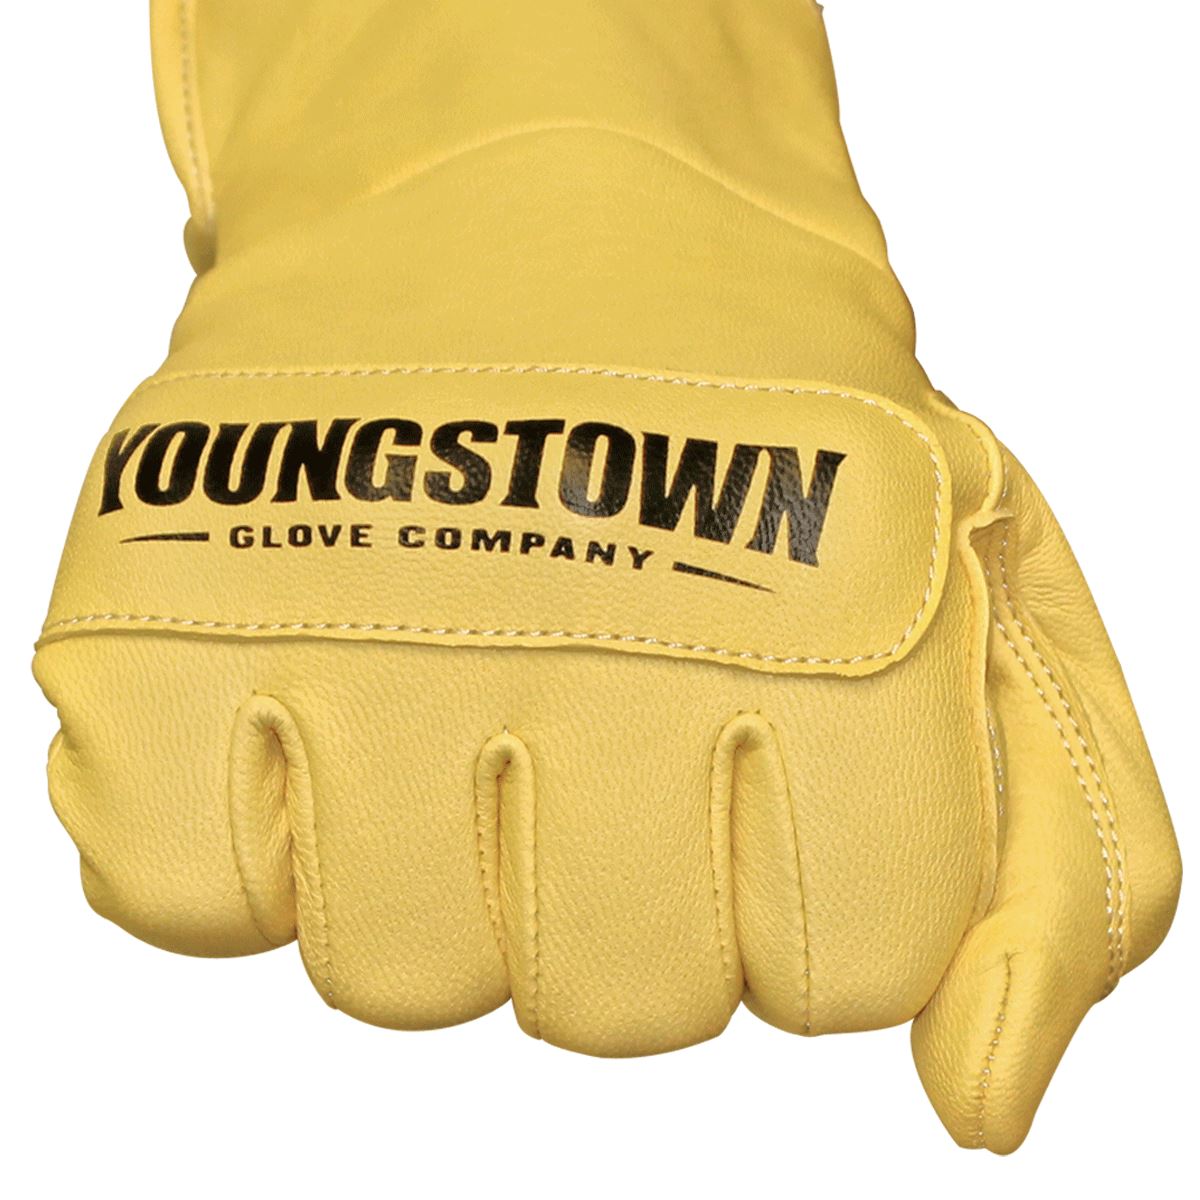 Youngstown Waterproof Winter Gloves Lined with Kevlar Large